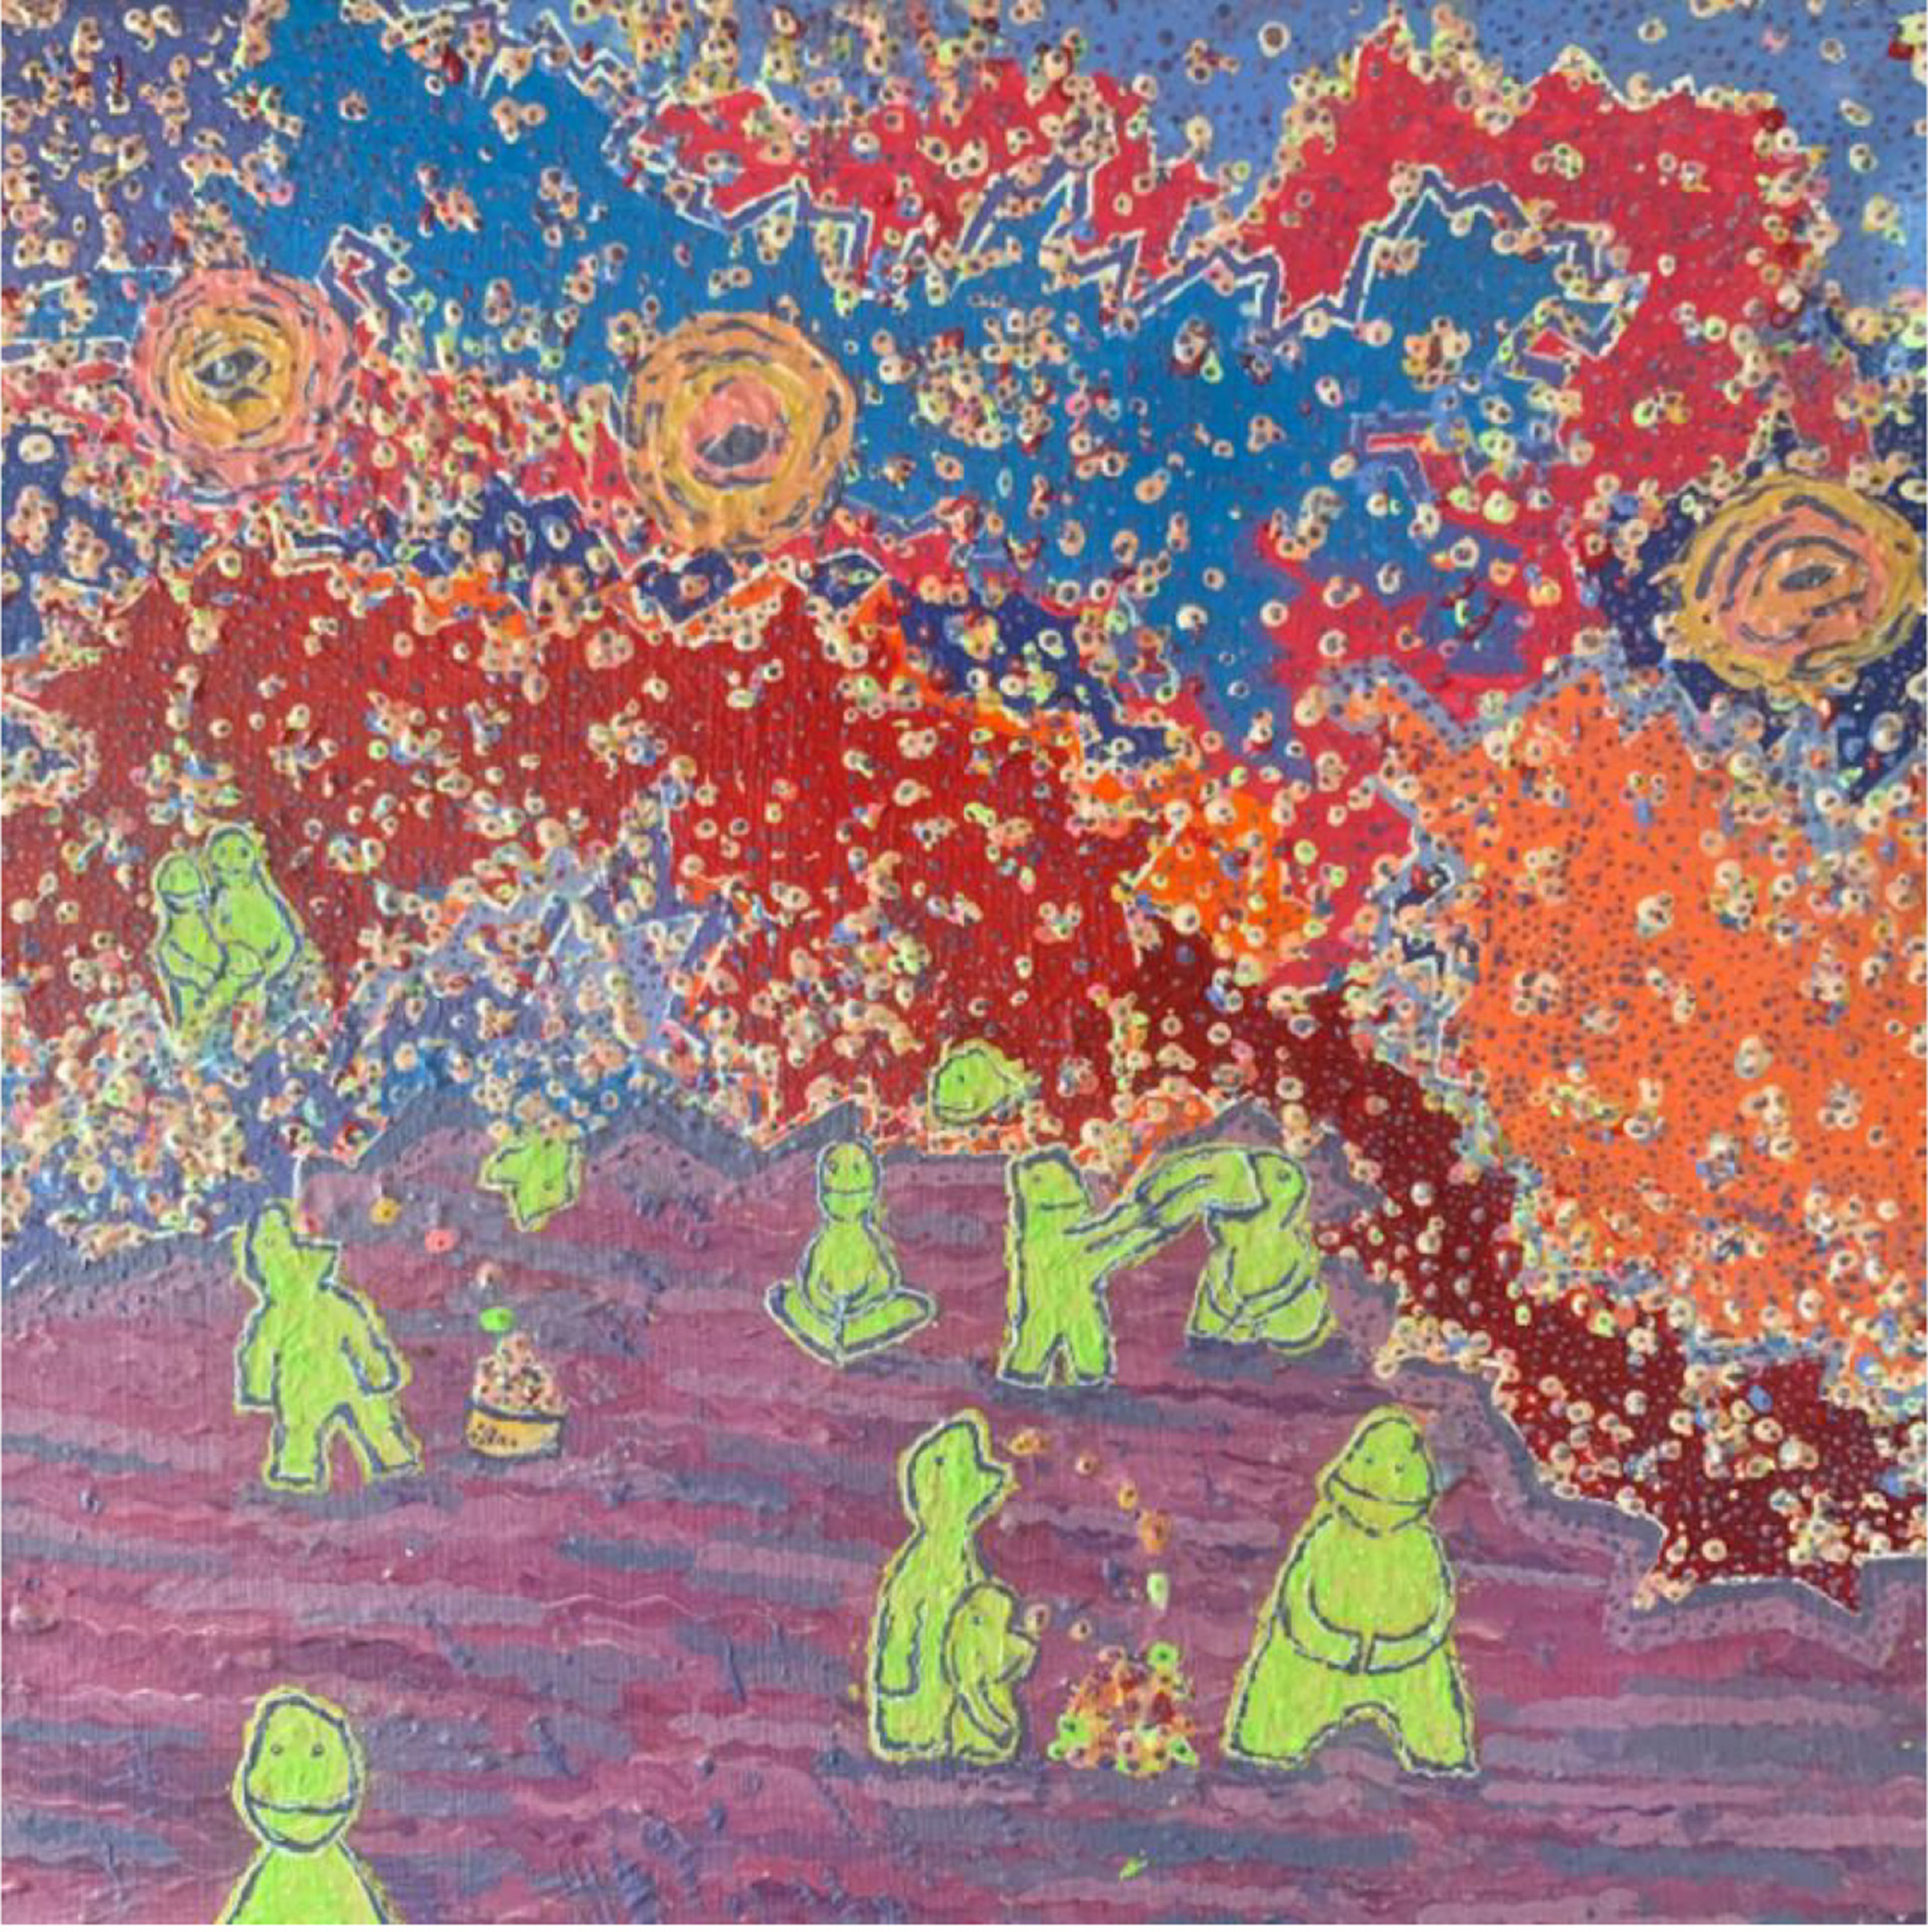 Painting of green creatures in an alien landscape with red, blue, and orange sky